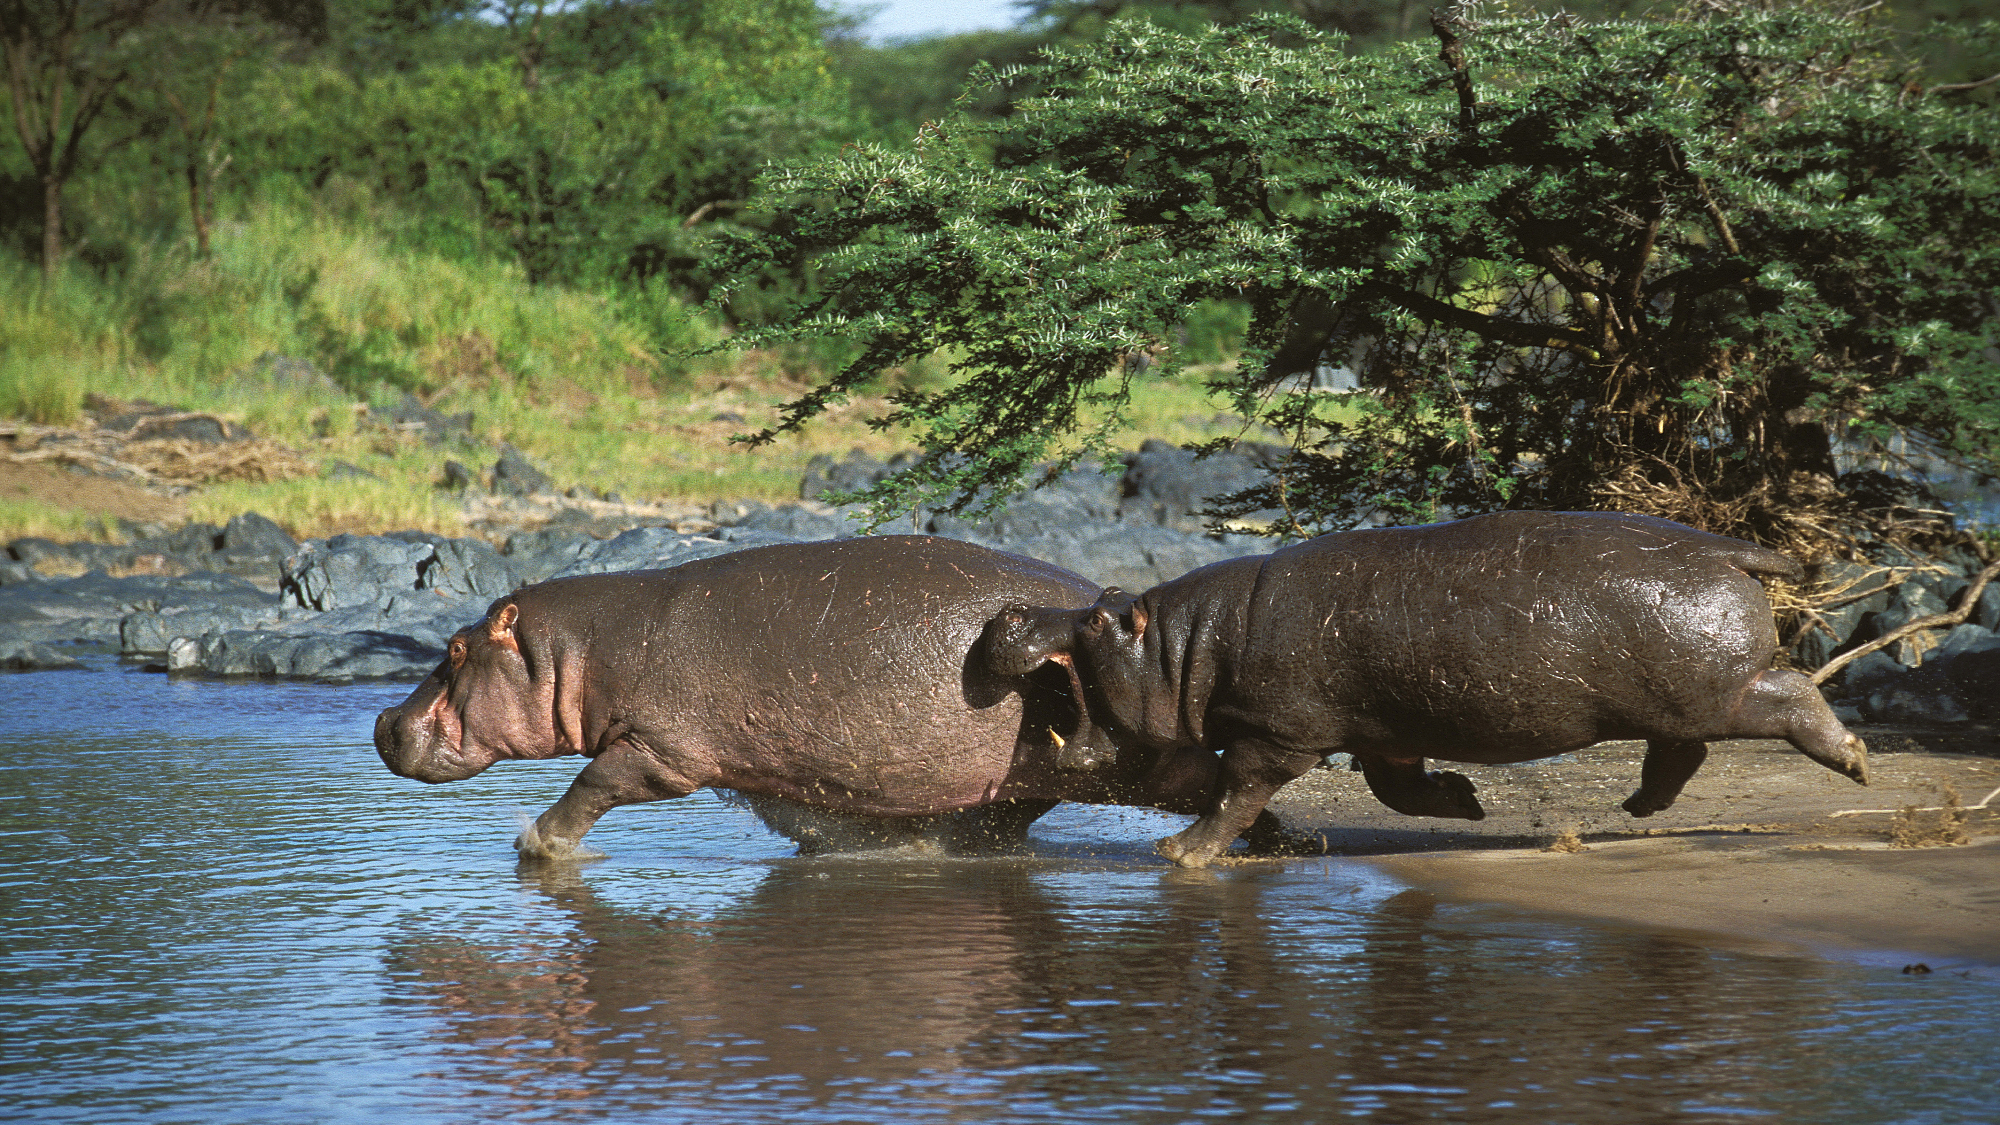  Hippos can fly, briefly 